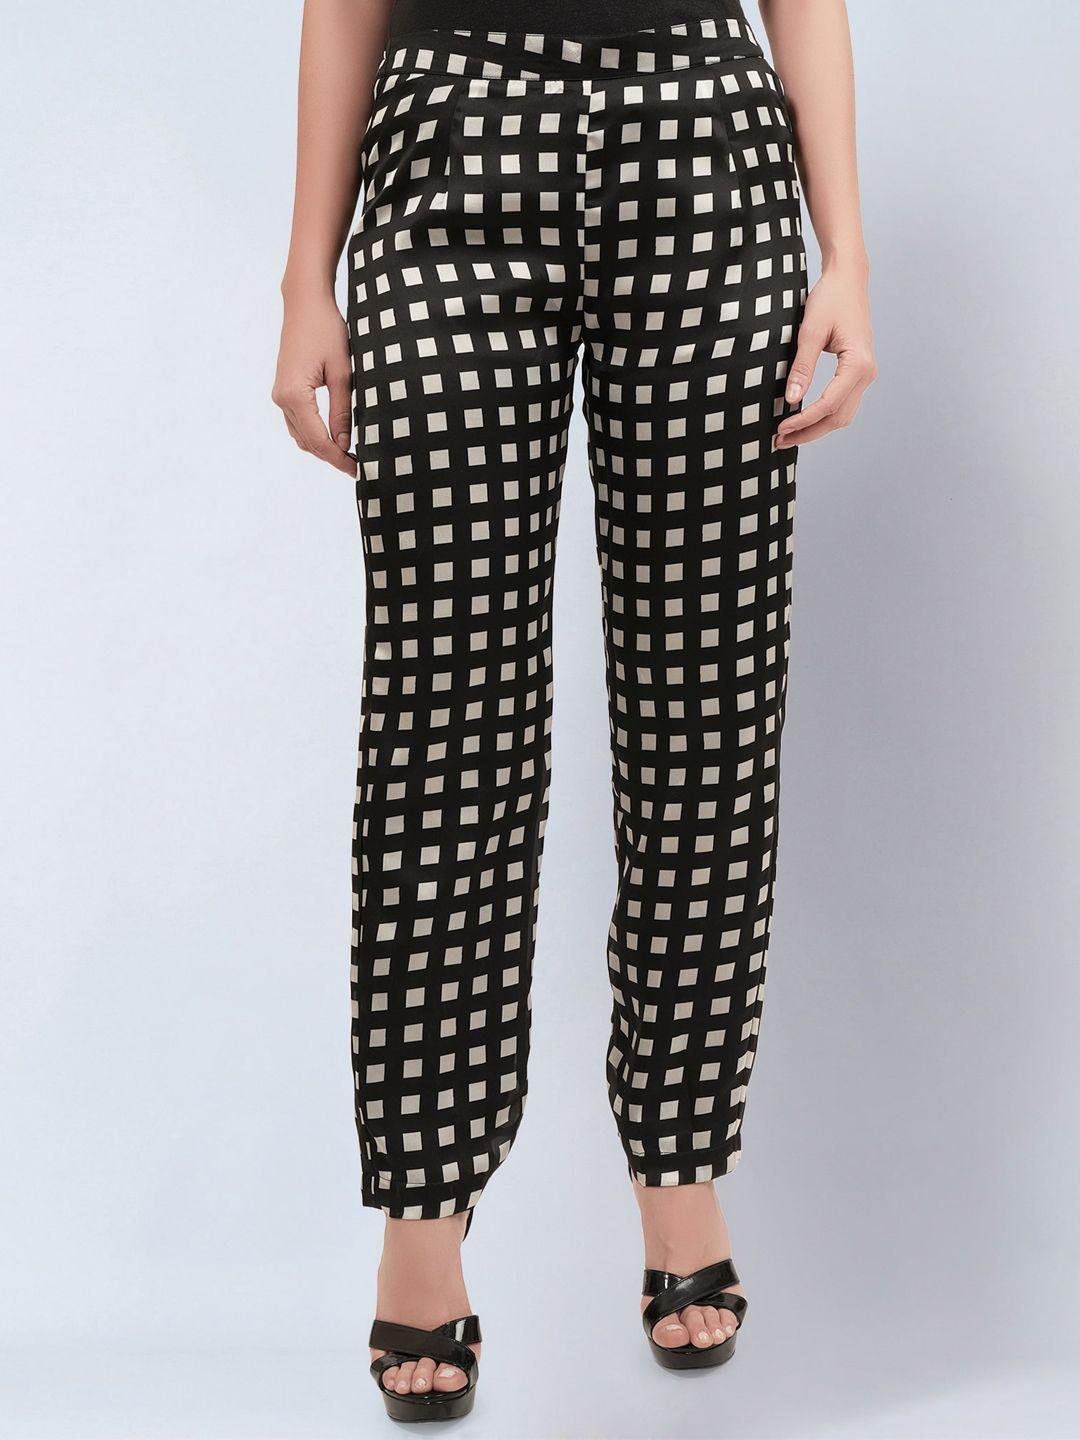 first-resort-by-ramola-bachchan-women-smart-geometric-printed-mid-rise-trousers